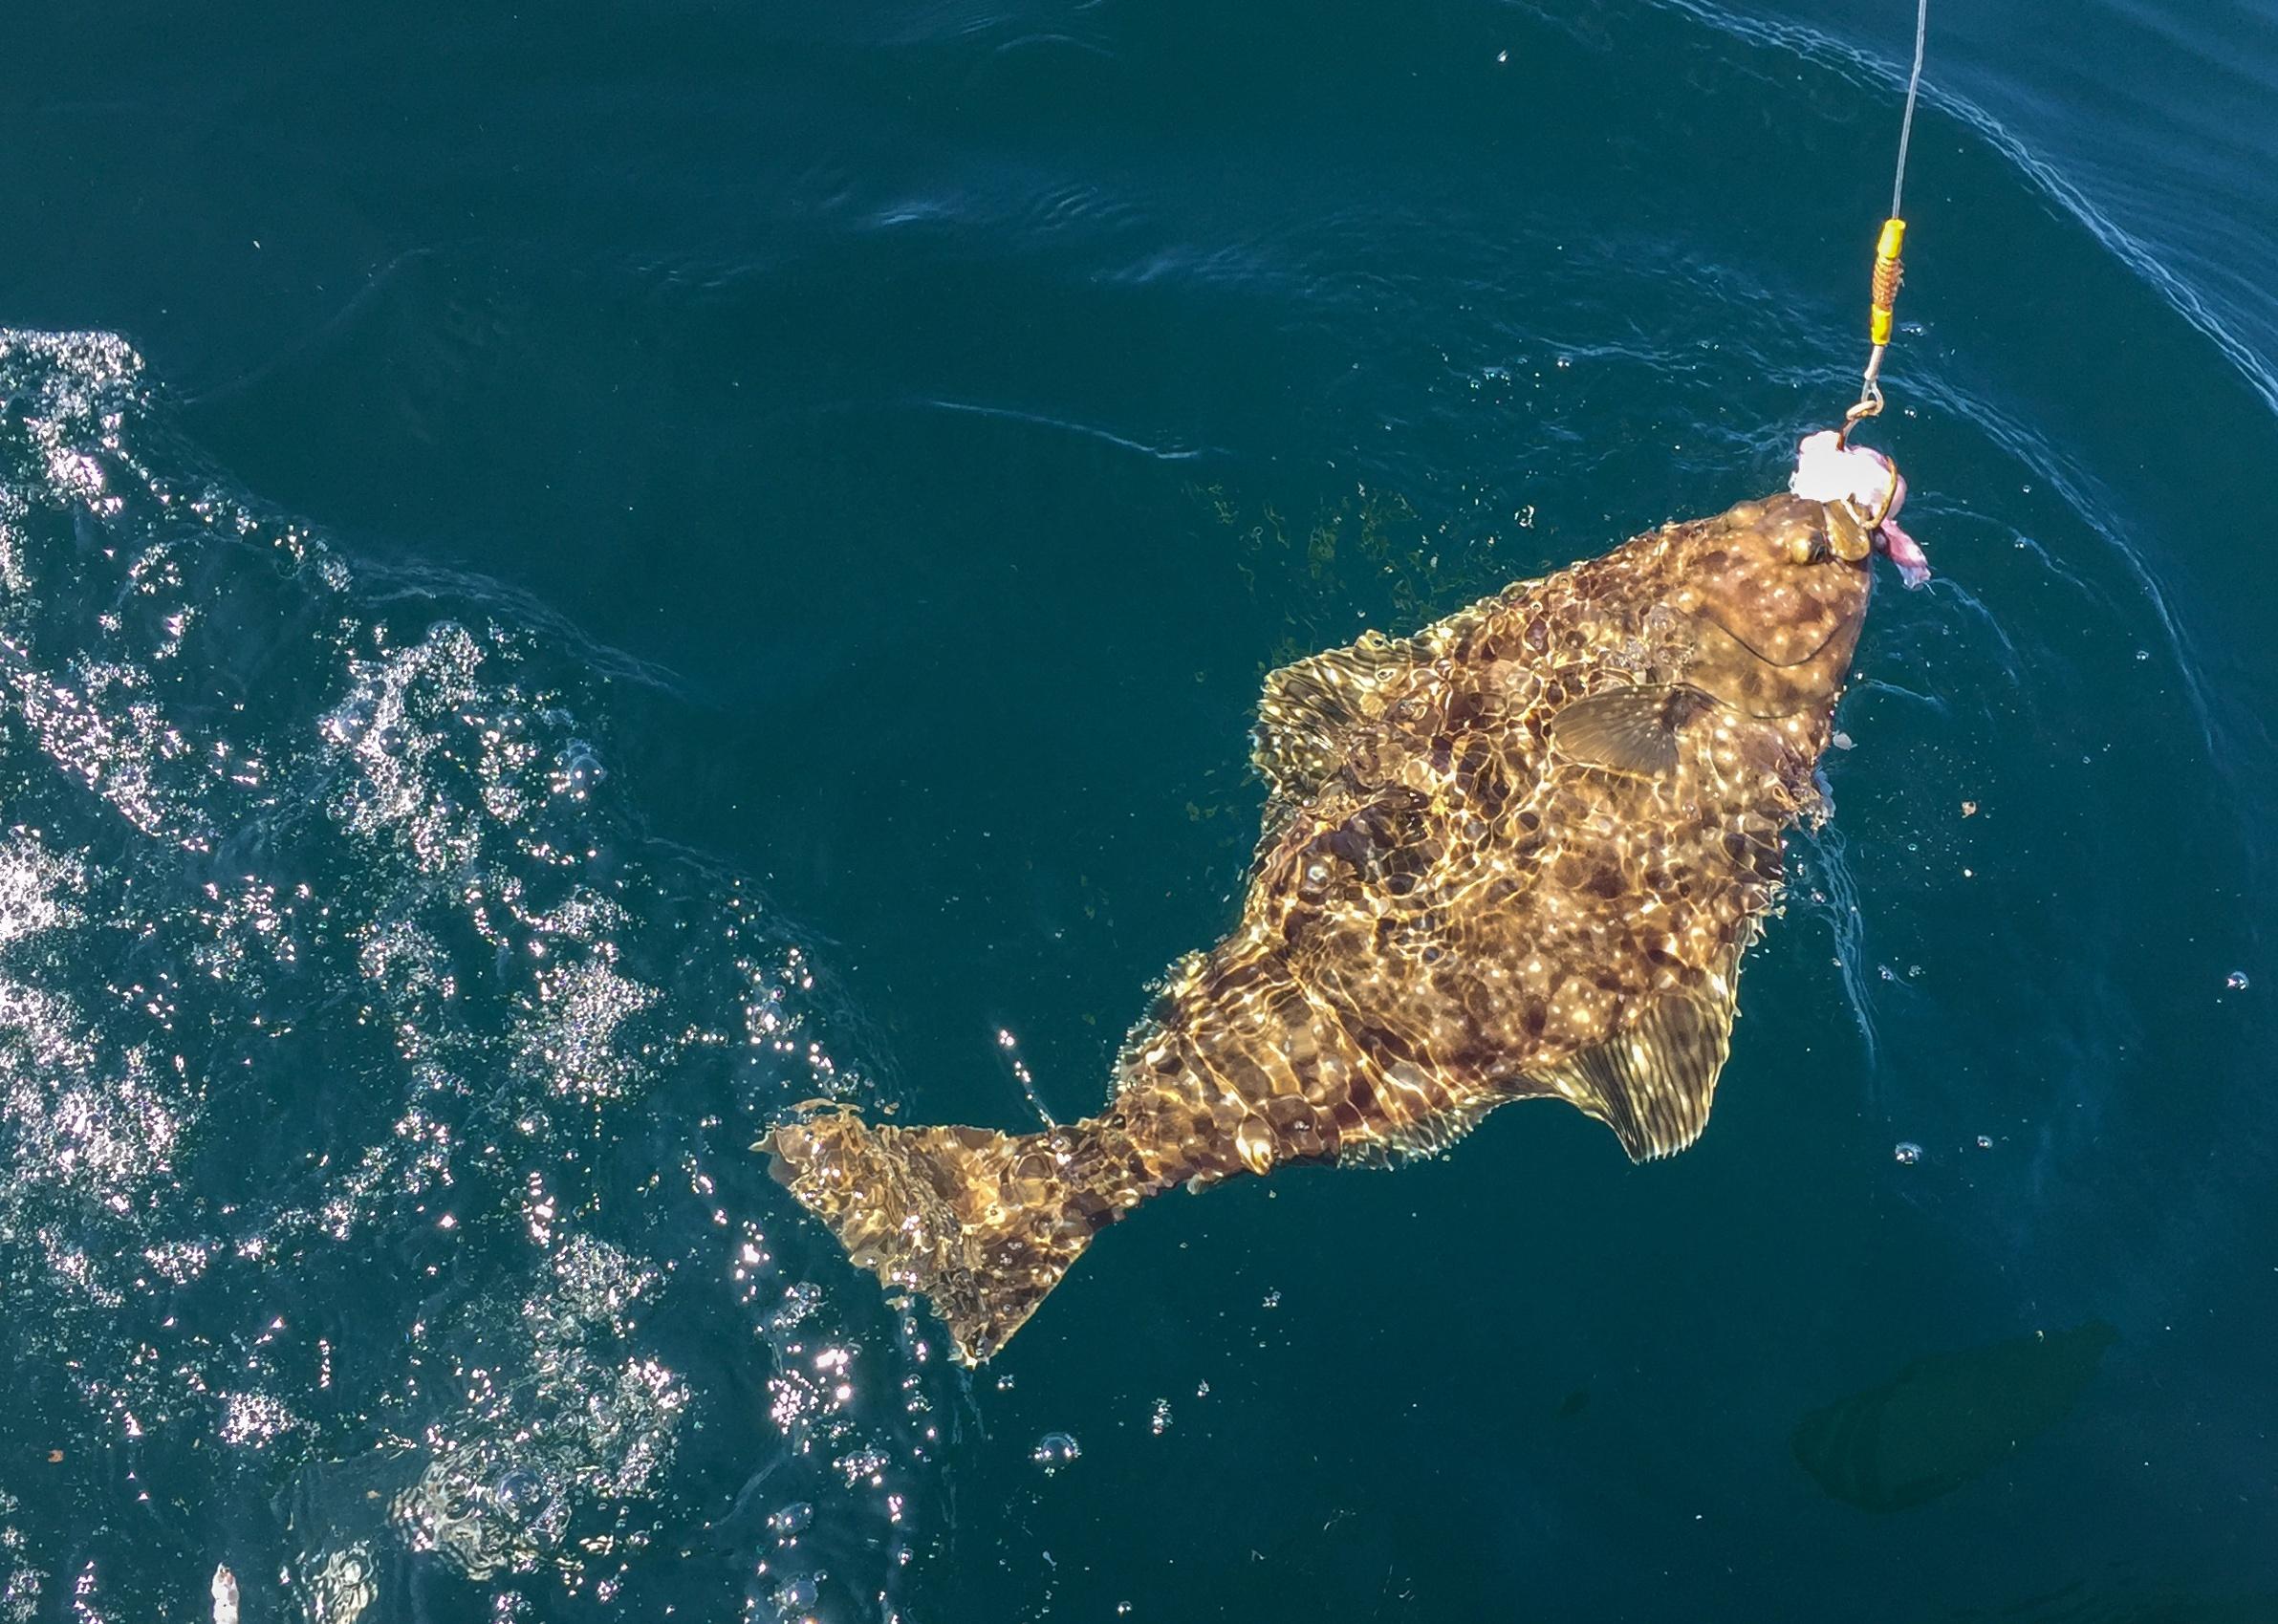 A bottom feeding Alaskan halibut pulled to the surface by a sport fisher.